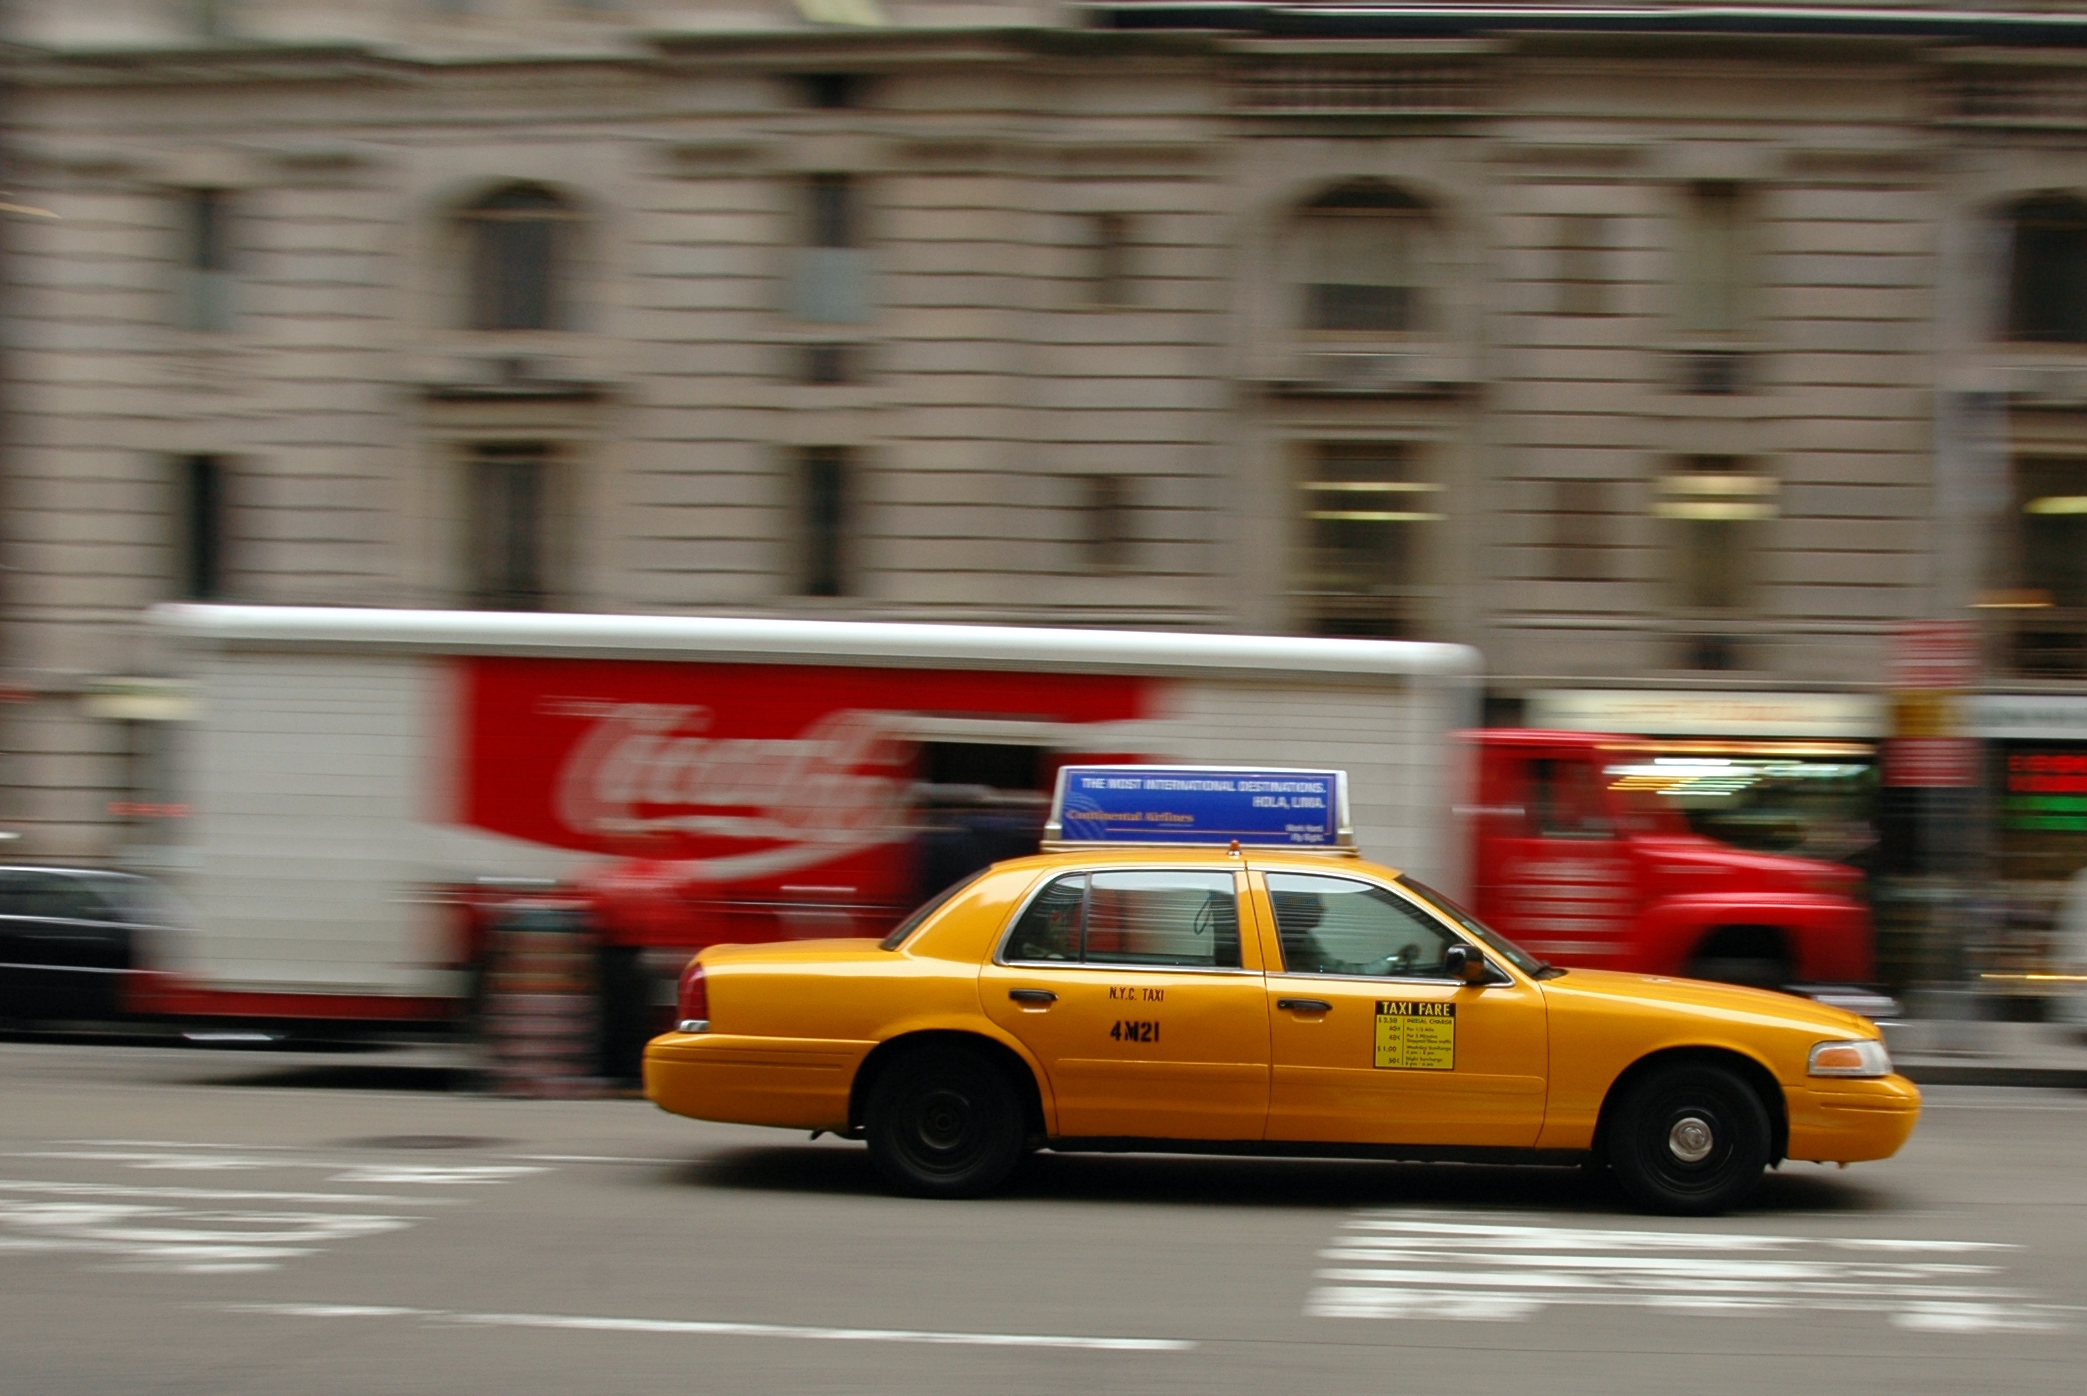 a taxi cab is moving down the street